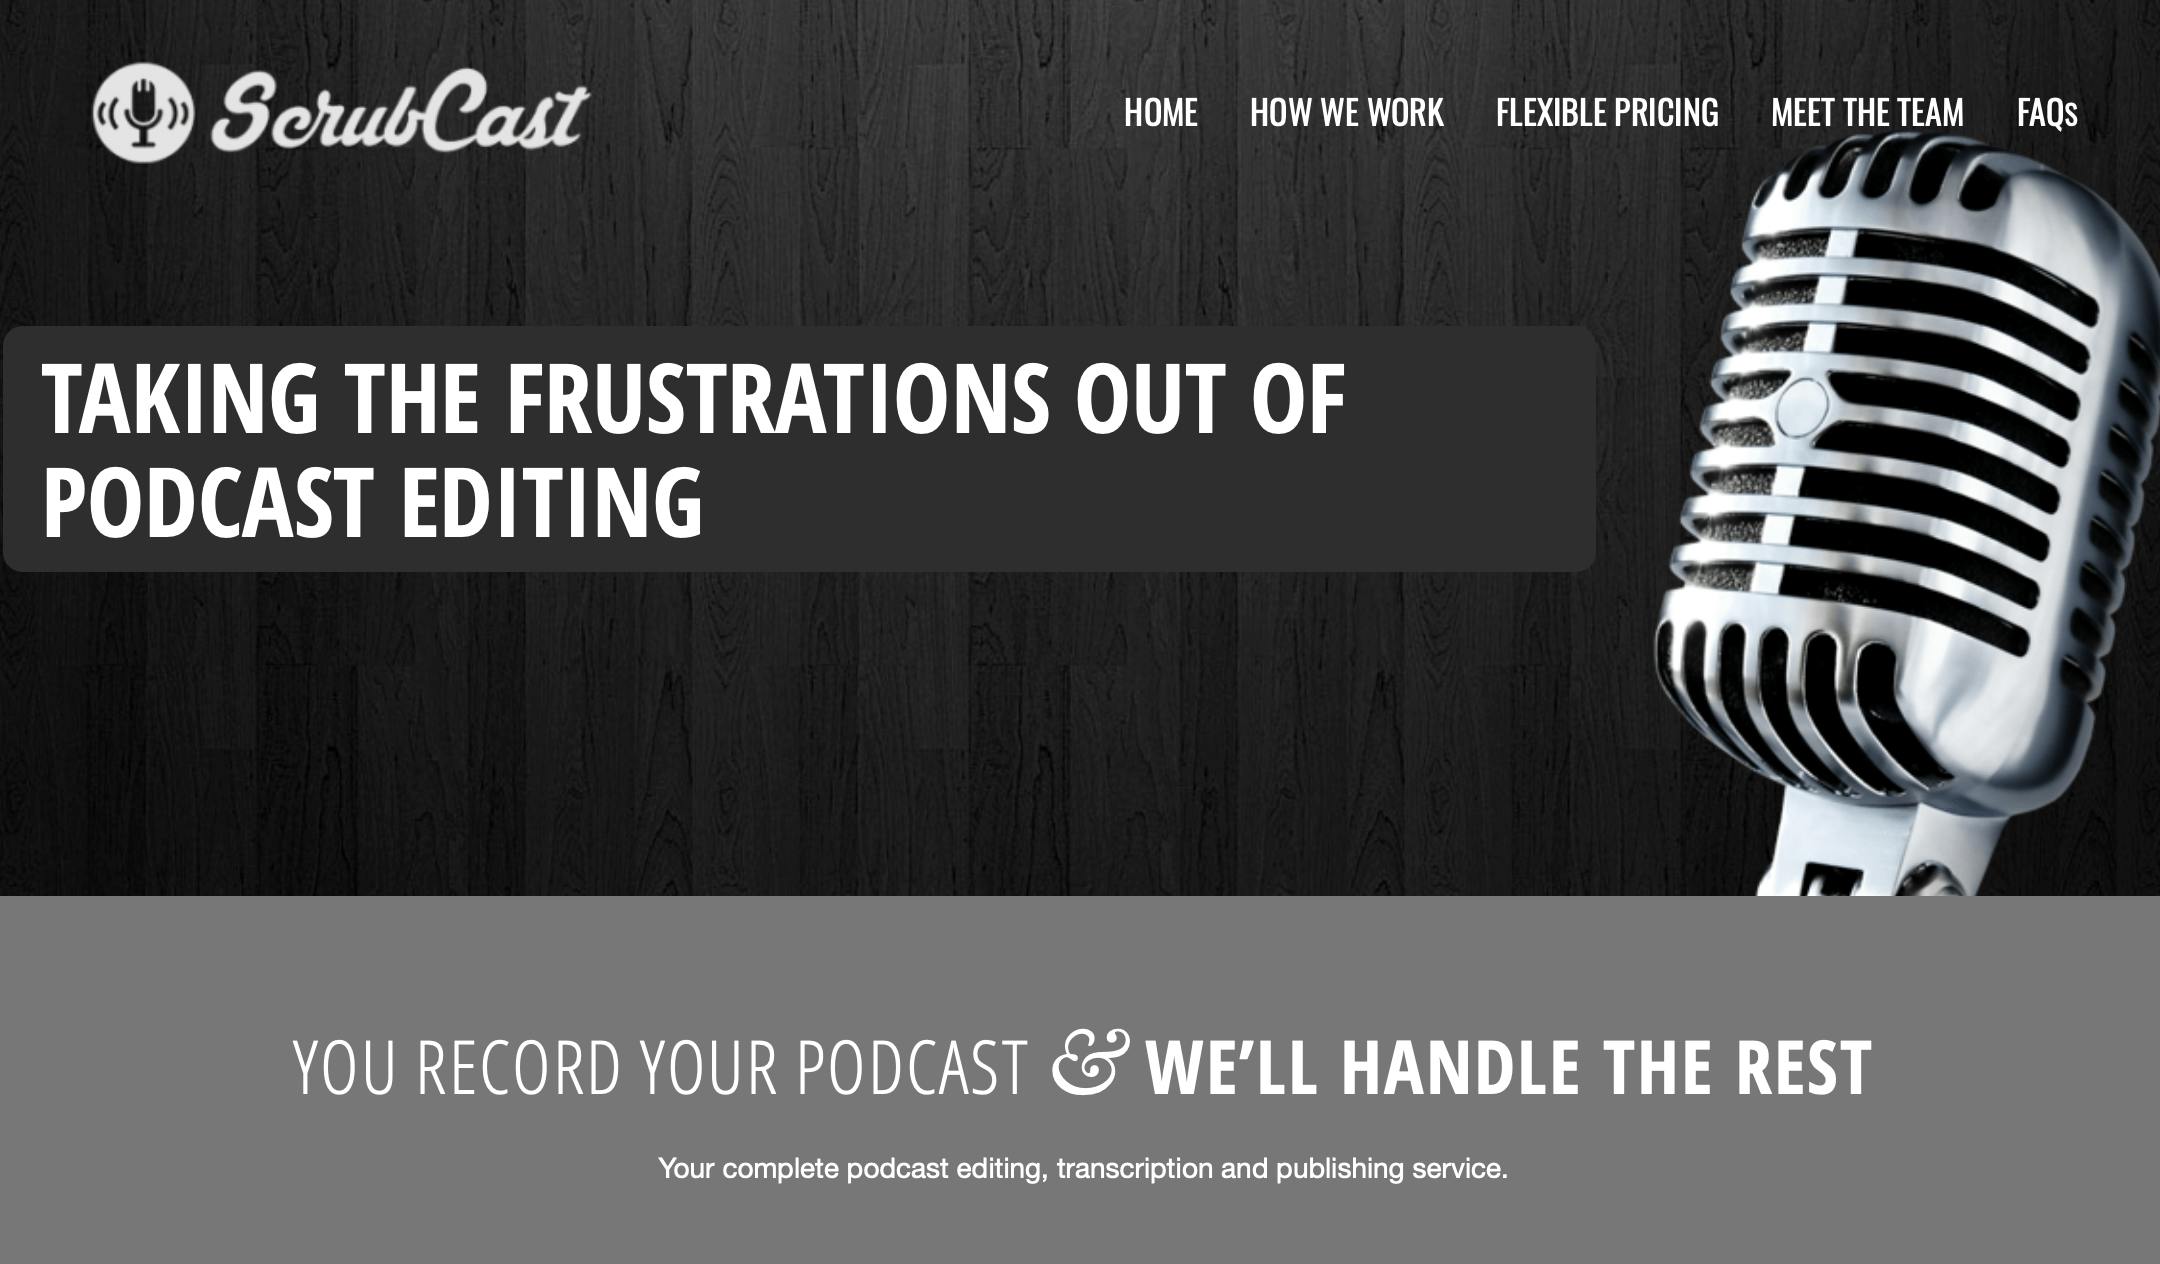 Scrubcast homepage with silver microphone